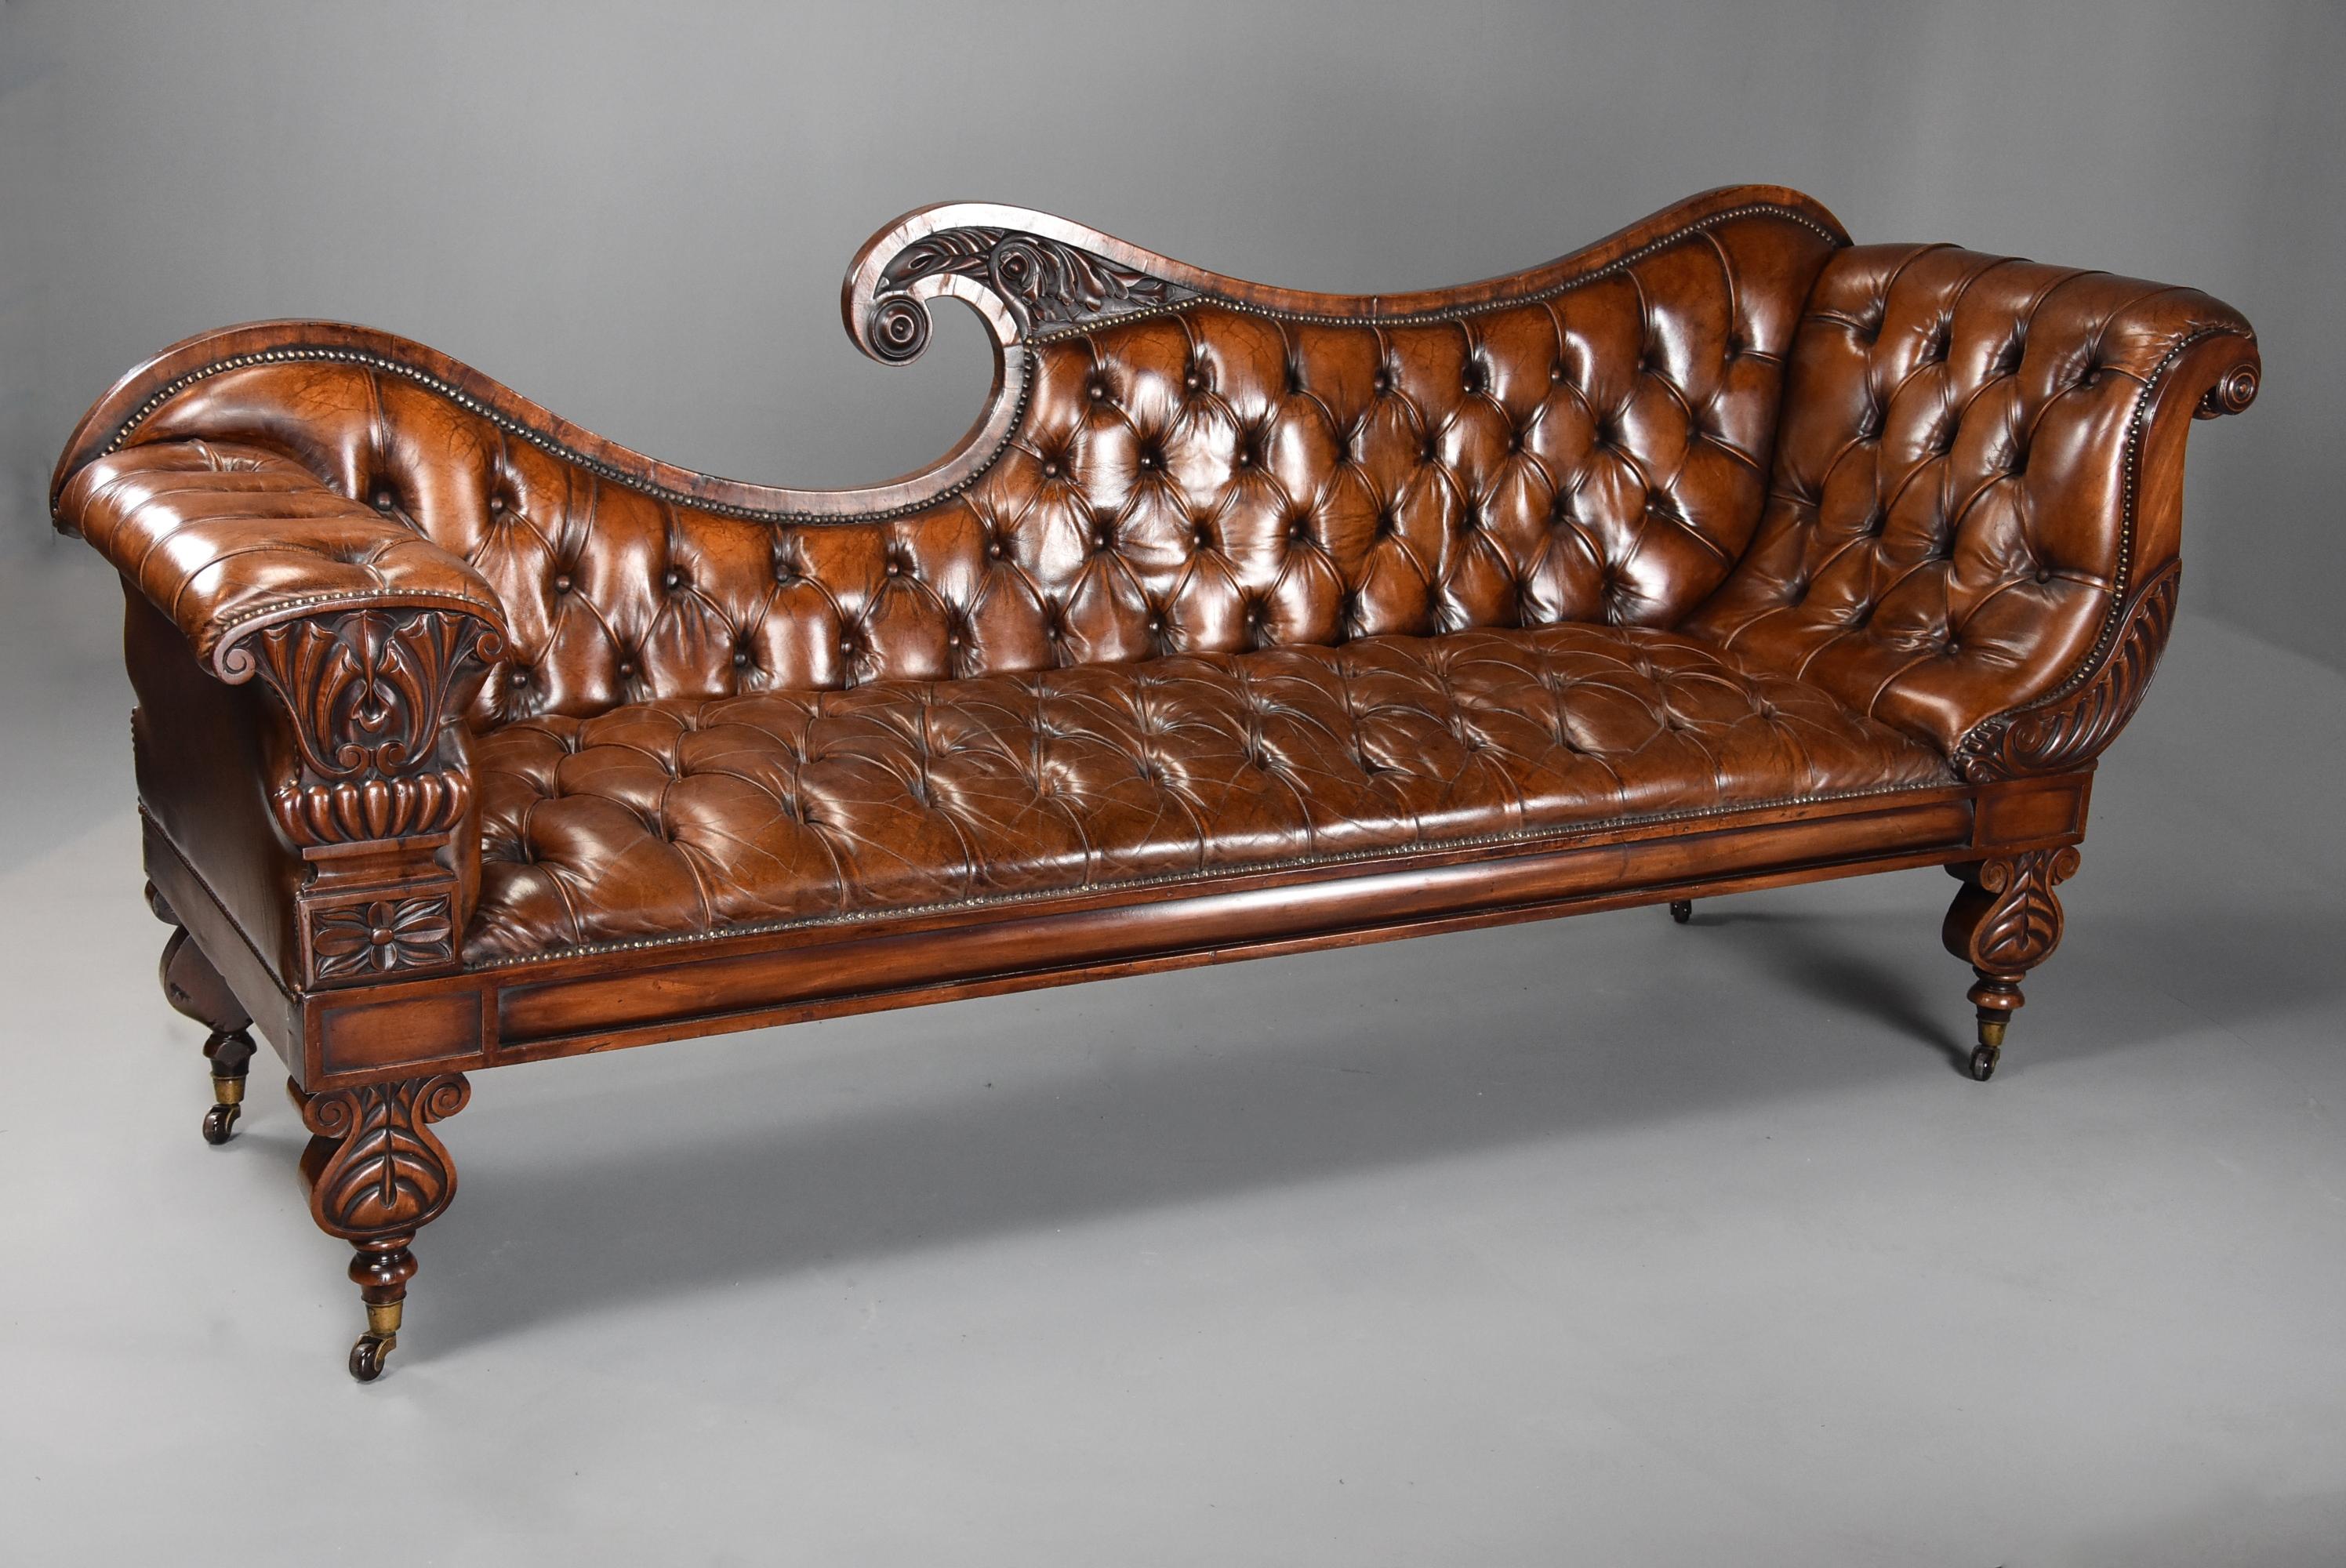 A superb late Regency/William IV (circa 1830) mahogany scroll back deep buttoned brown leather sofa with design influences of the notable 19th century Furniture designers John Taylor and George Smith.

This sofa consists of a shaped mahogany back